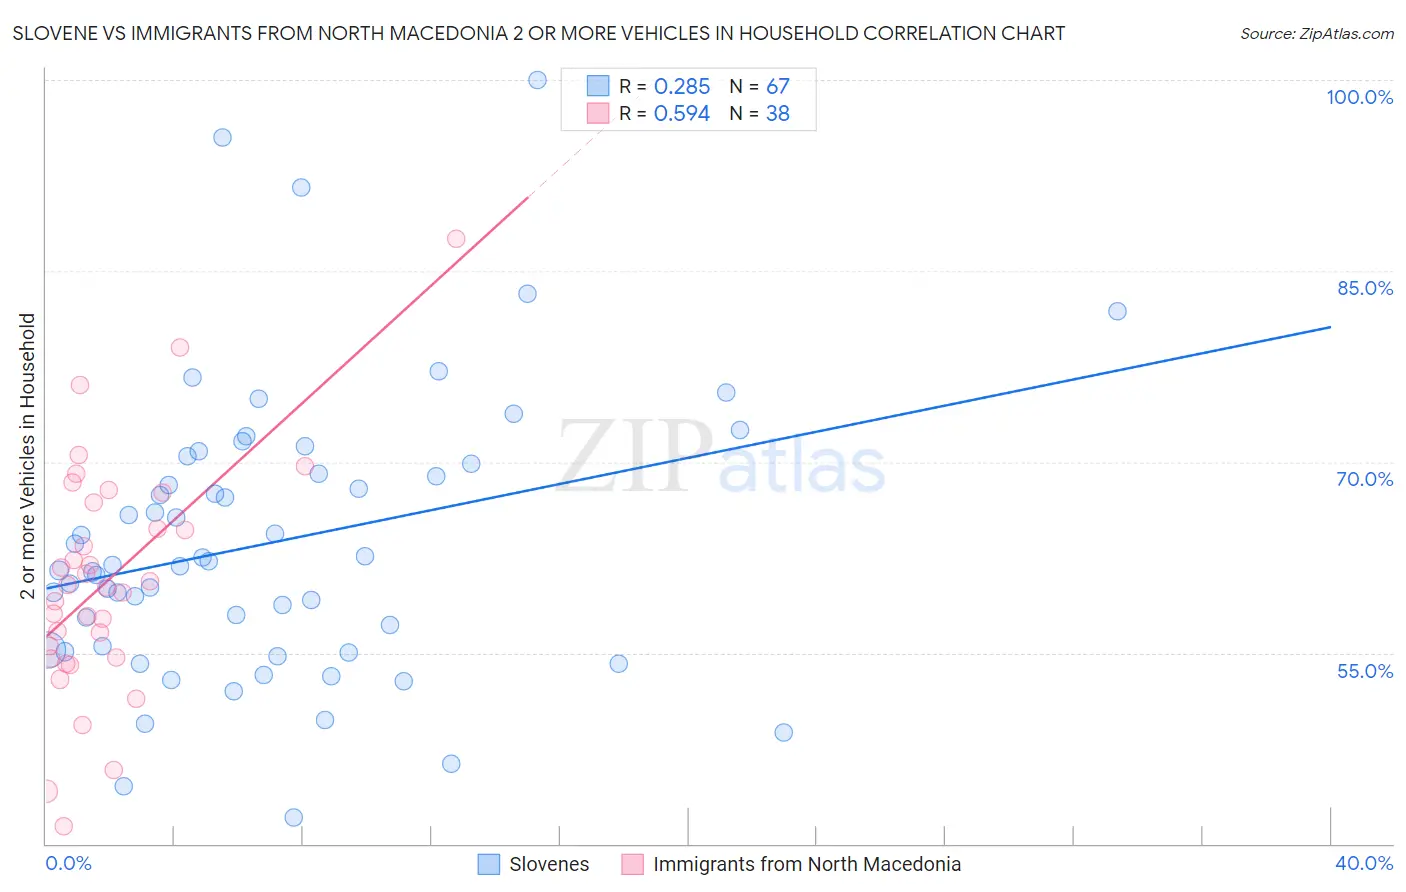 Slovene vs Immigrants from North Macedonia 2 or more Vehicles in Household